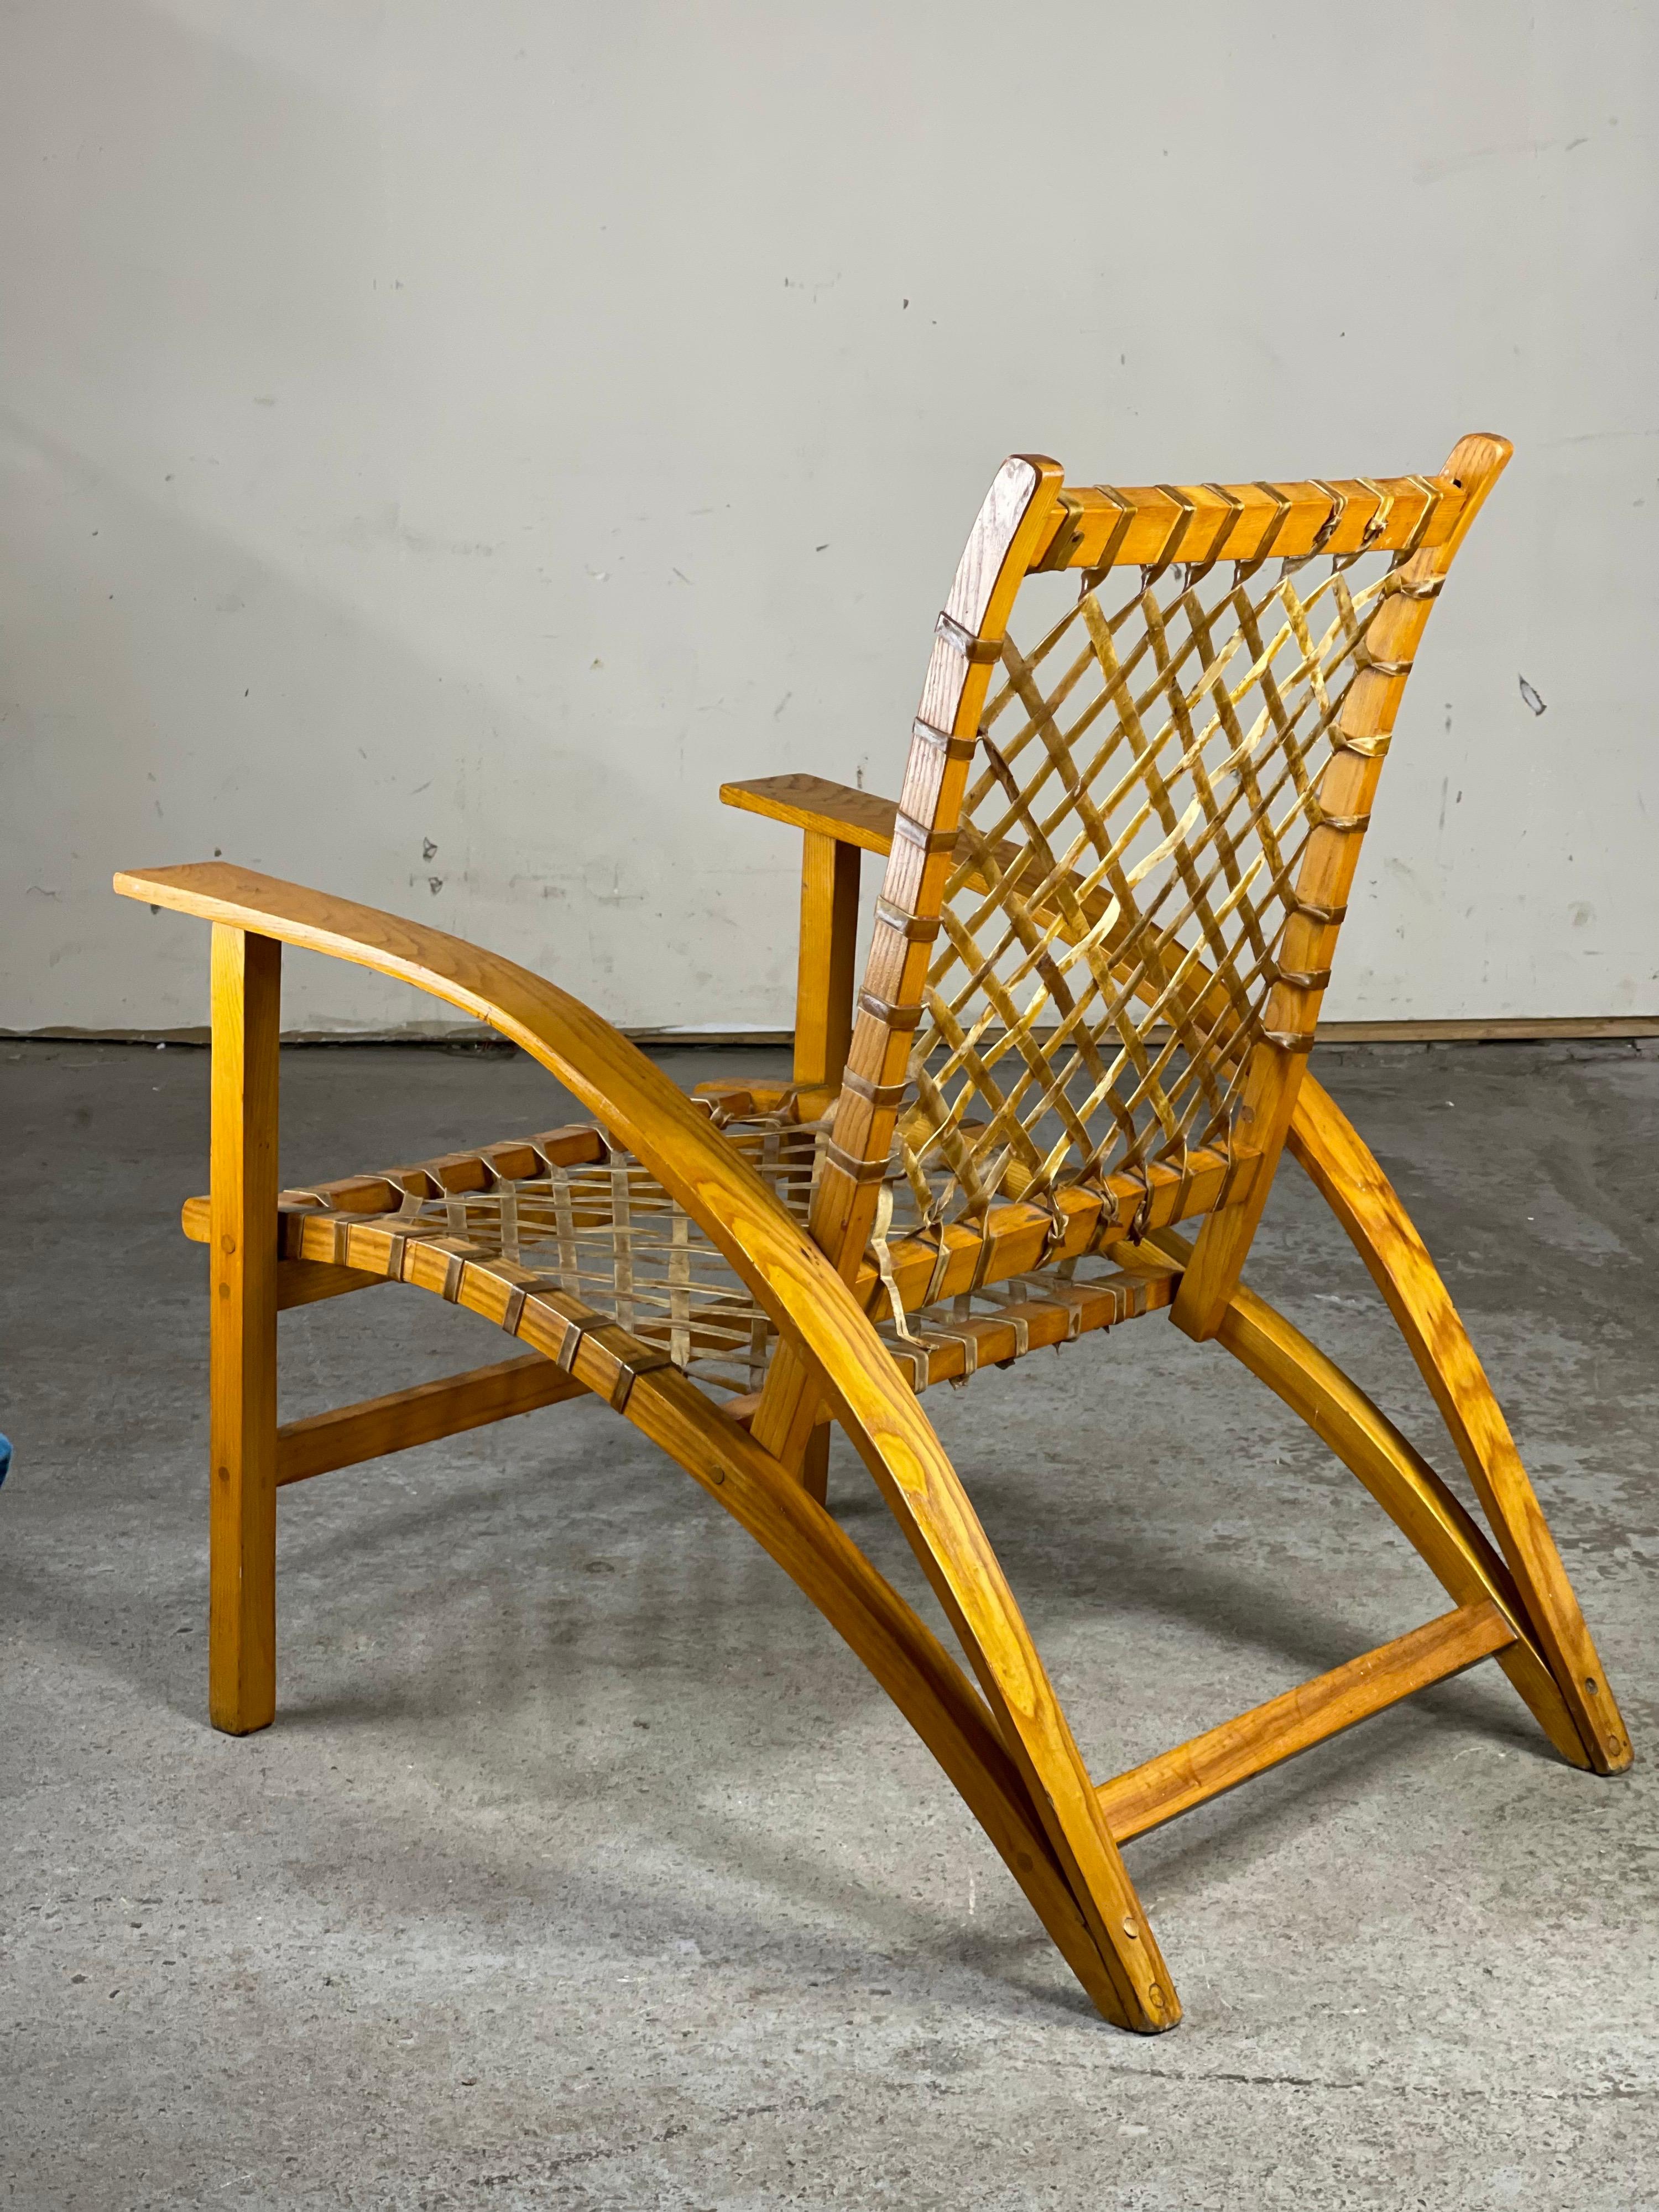 'Snow Shu' Lounge Chair by Carl Koch for Vermont Tubbs 1952 Adirondack Style In Good Condition In Framingham, MA